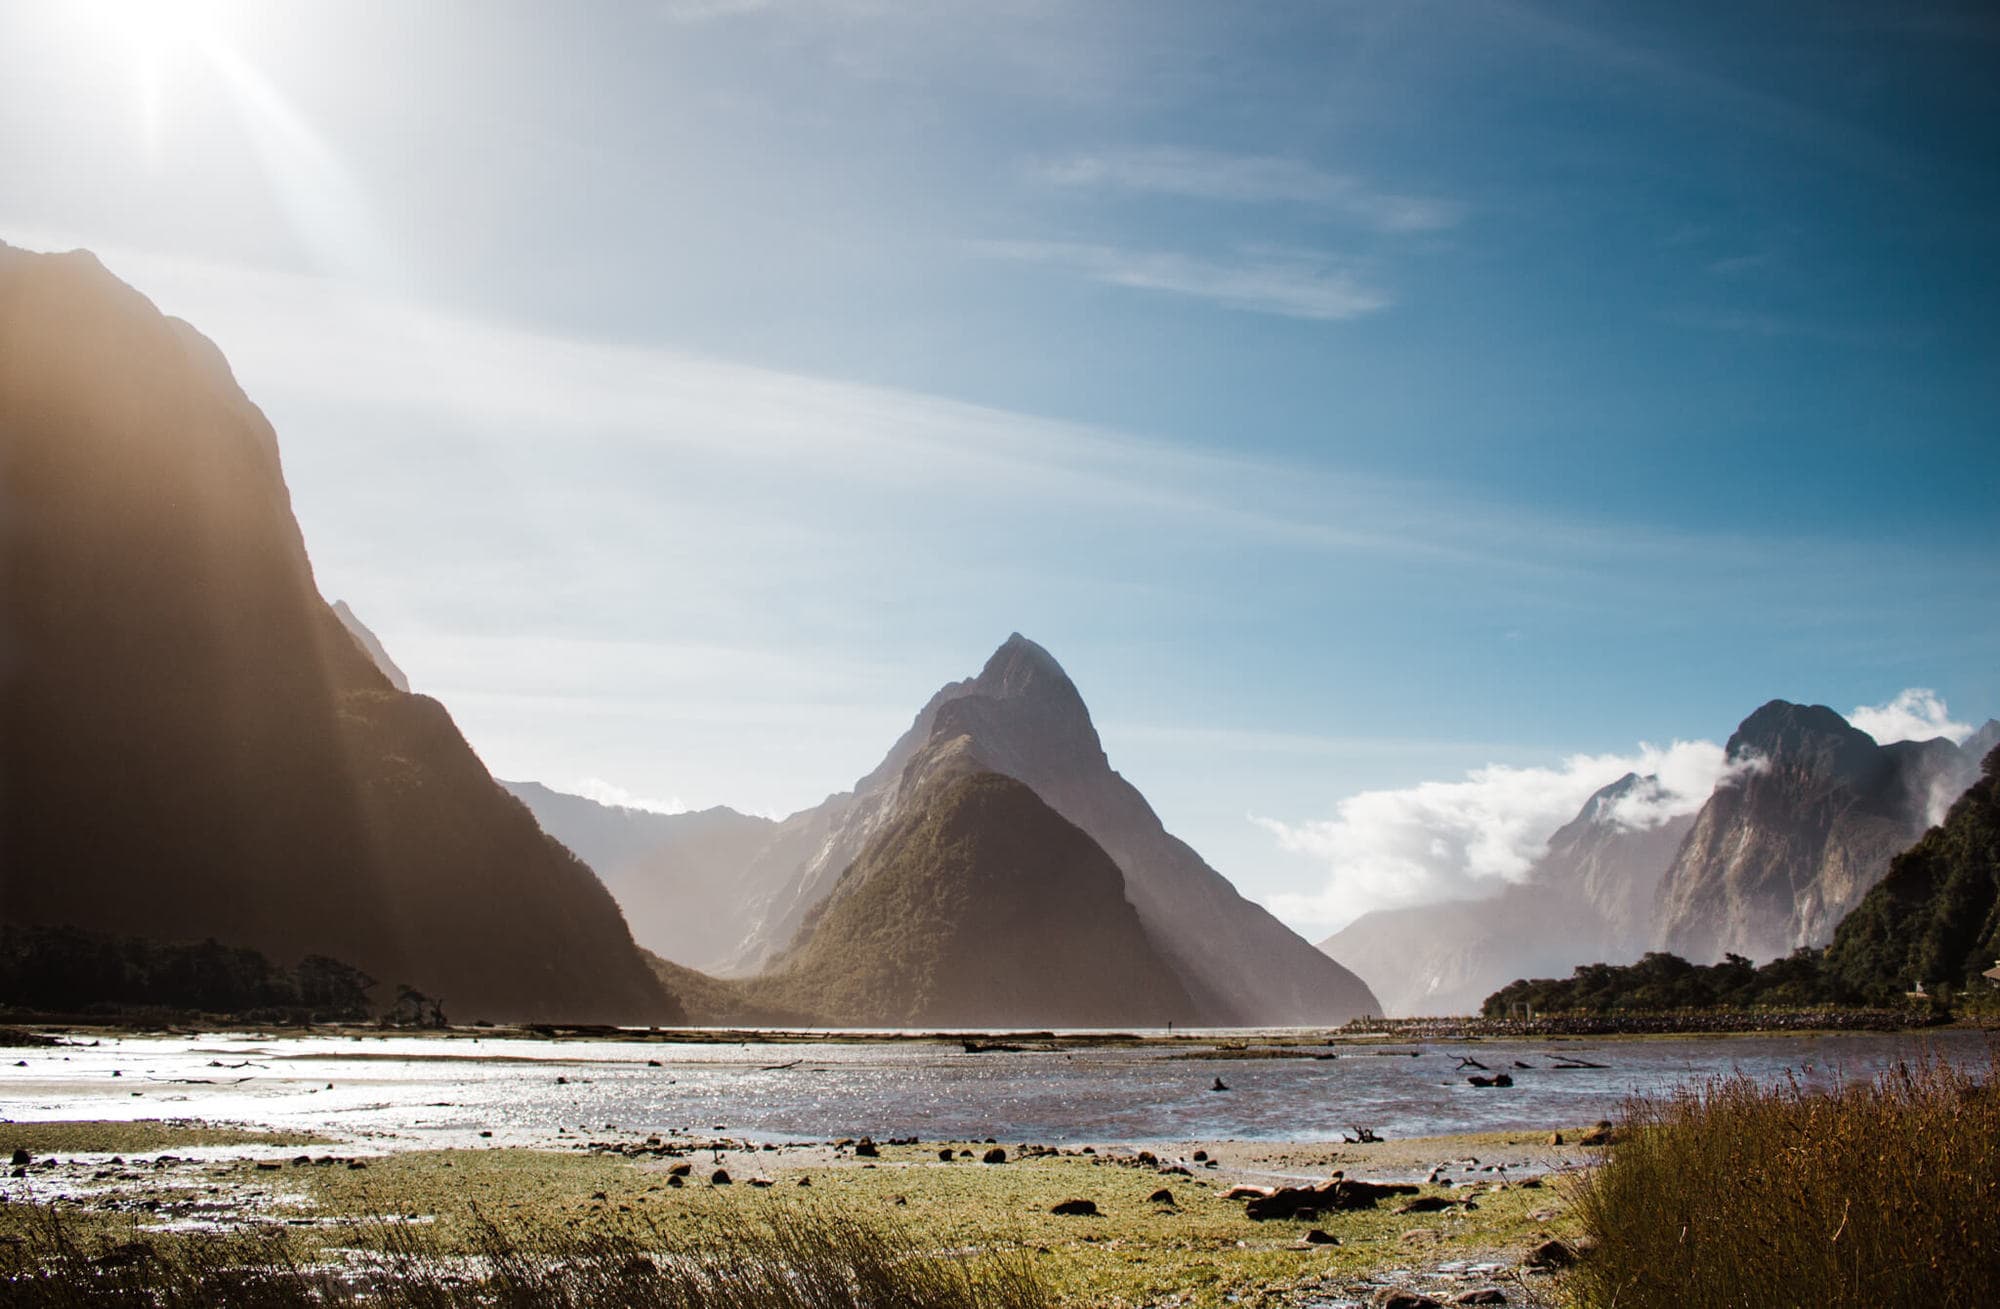 New Zealand had always been at the top of my bucket list but I had no idea what was in store. Some trips change you. This New Zealand Road Trip changed me.